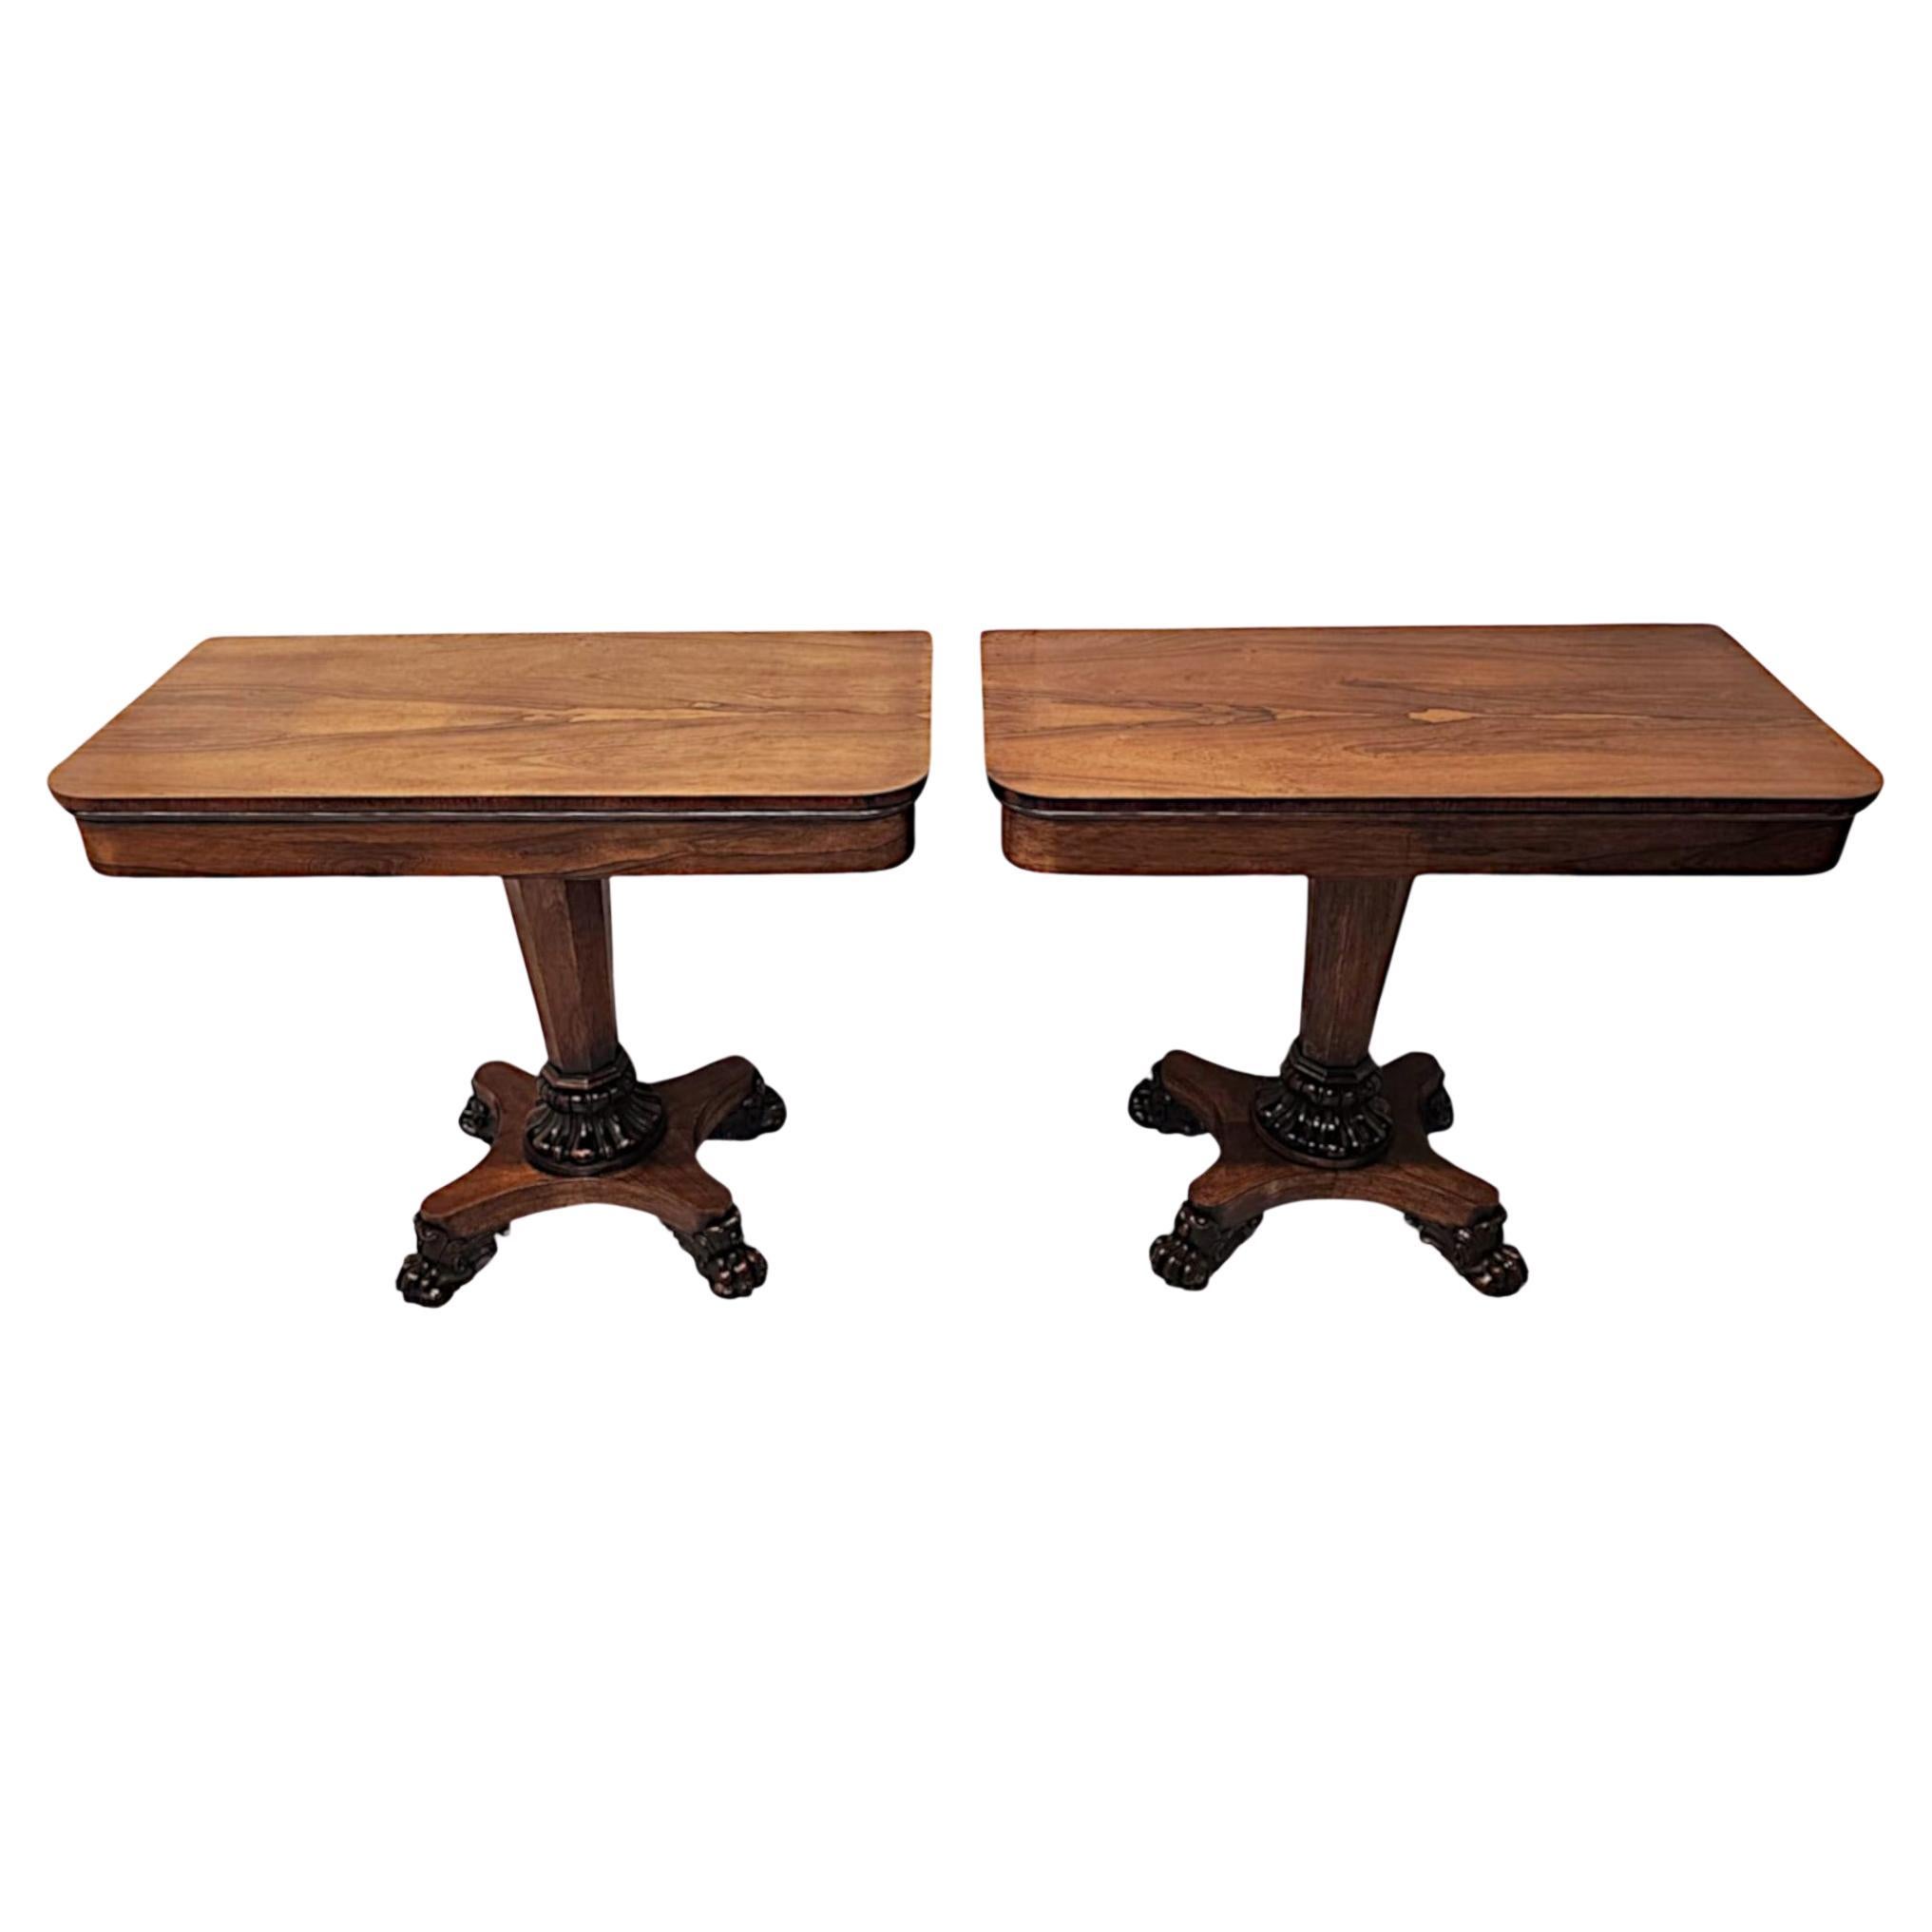 A Rare Pair of Early 19th Century William IV Card Tables For Sale